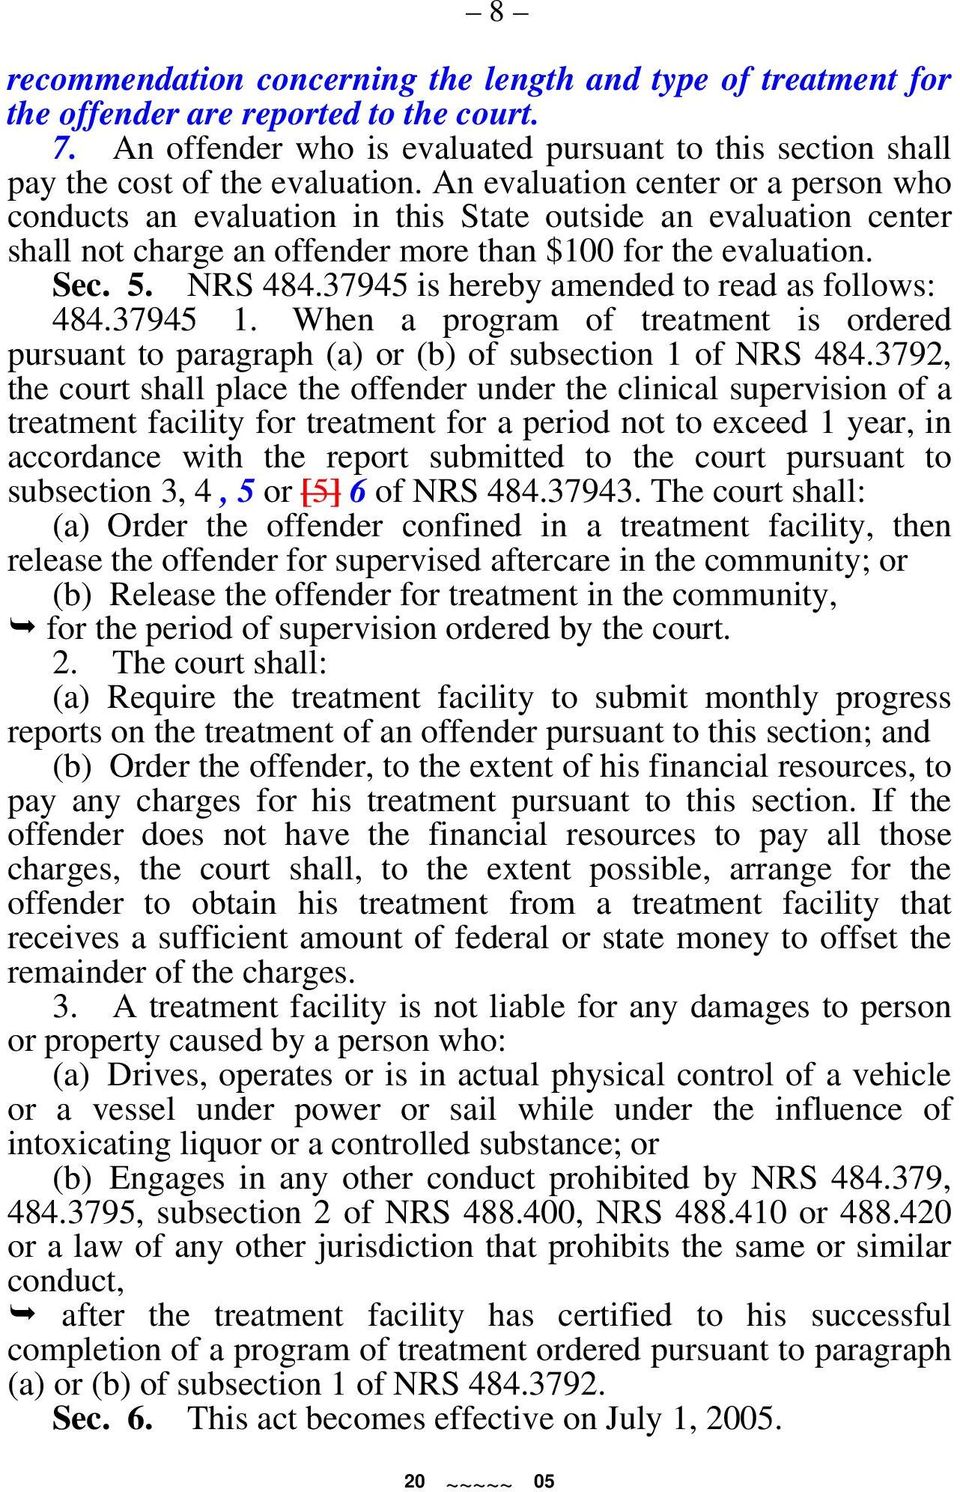 37945 is hereby amended to read as follows: 484.37945 1. When a program of treatment is ordered pursuant to paragraph (a) or (b) of subsection 1 of NRS 484.